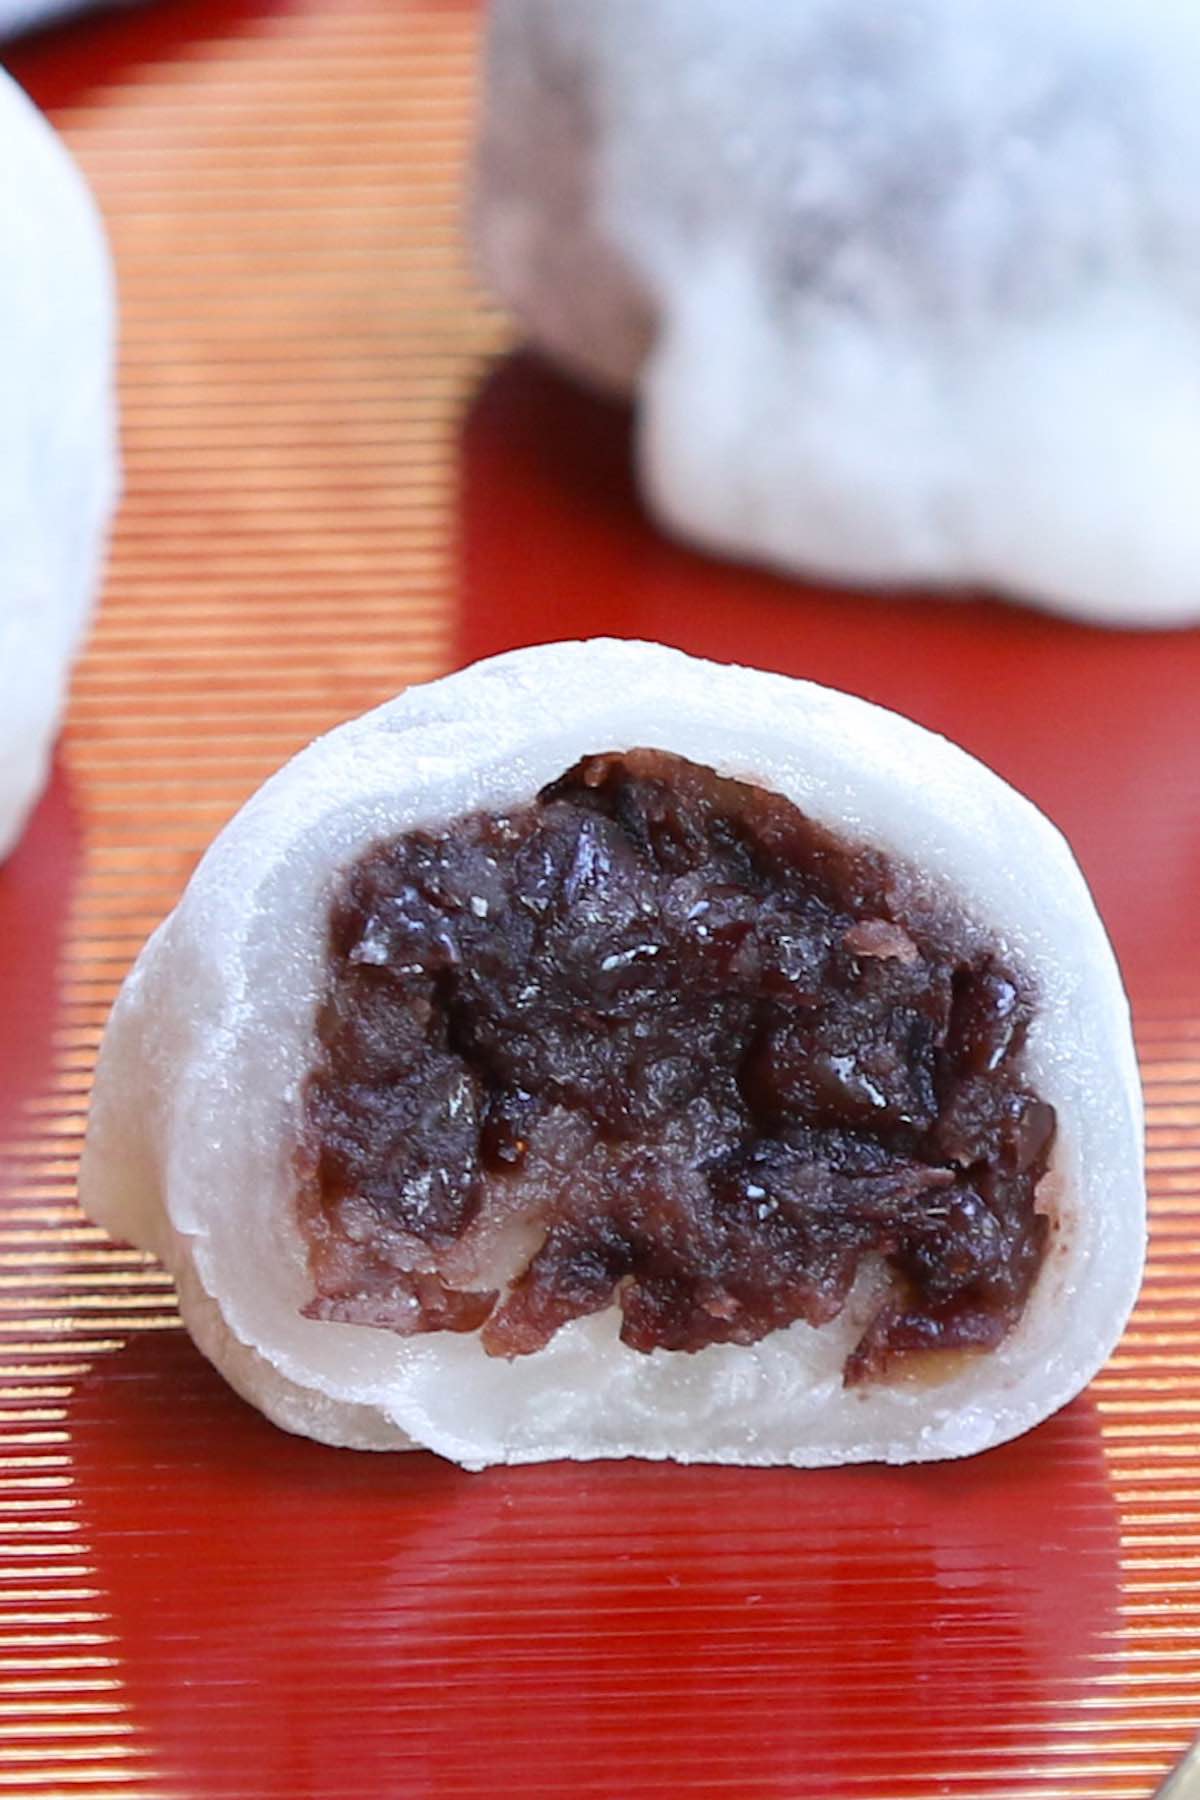 Daifuku!! This popular Japanese recipe makes a soft, tender, and chewy mochi rice cake enclosing a creamy, sweet red bean paste filling. Pure mocha dessert bliss! With some simple tips, you can make this delicious snack in your own home and customize with your favorite fillings. #daifuku #DaifukuMochi